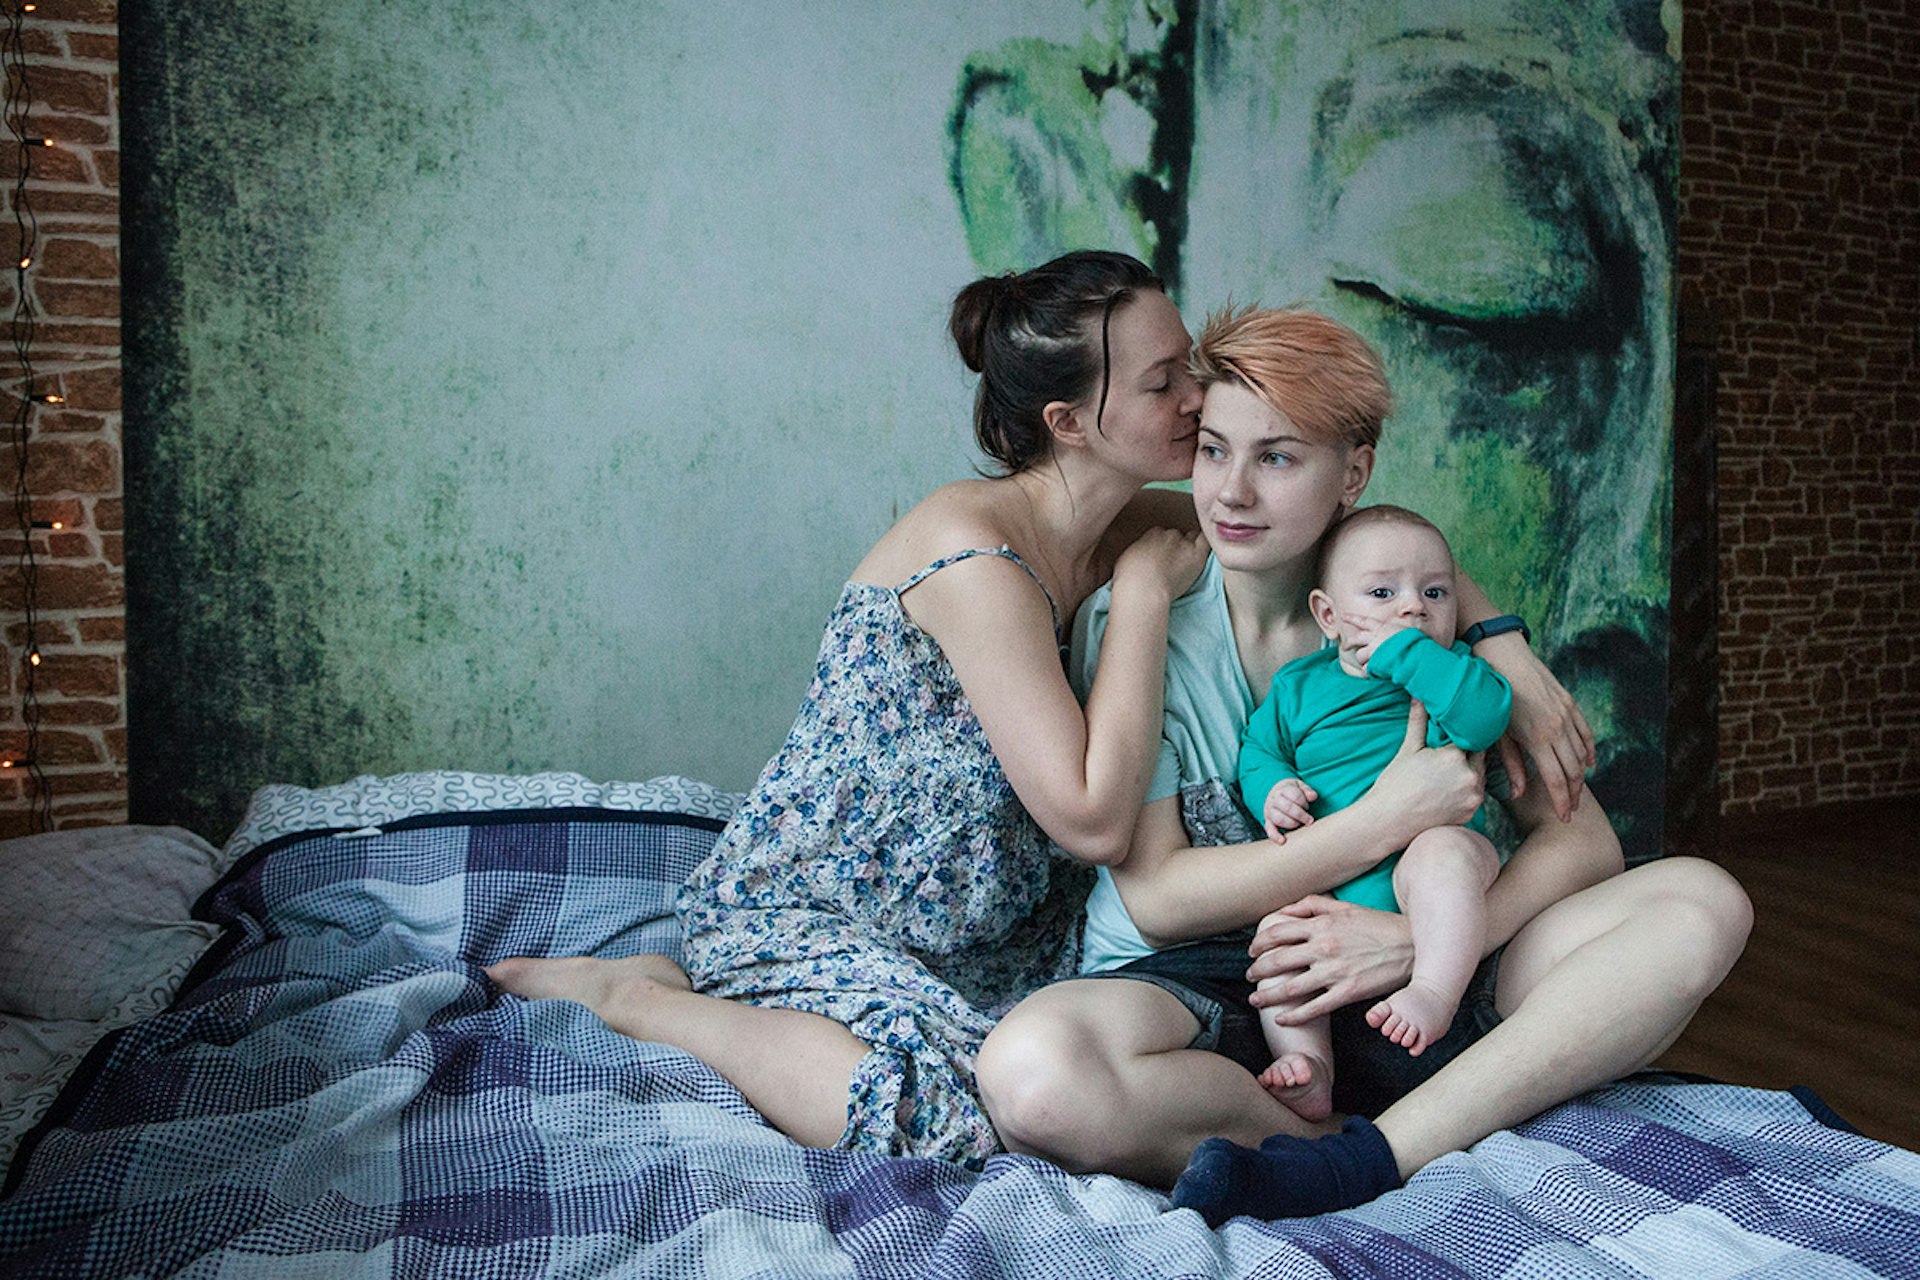 The queer Russian couples refusing to apologise for their love